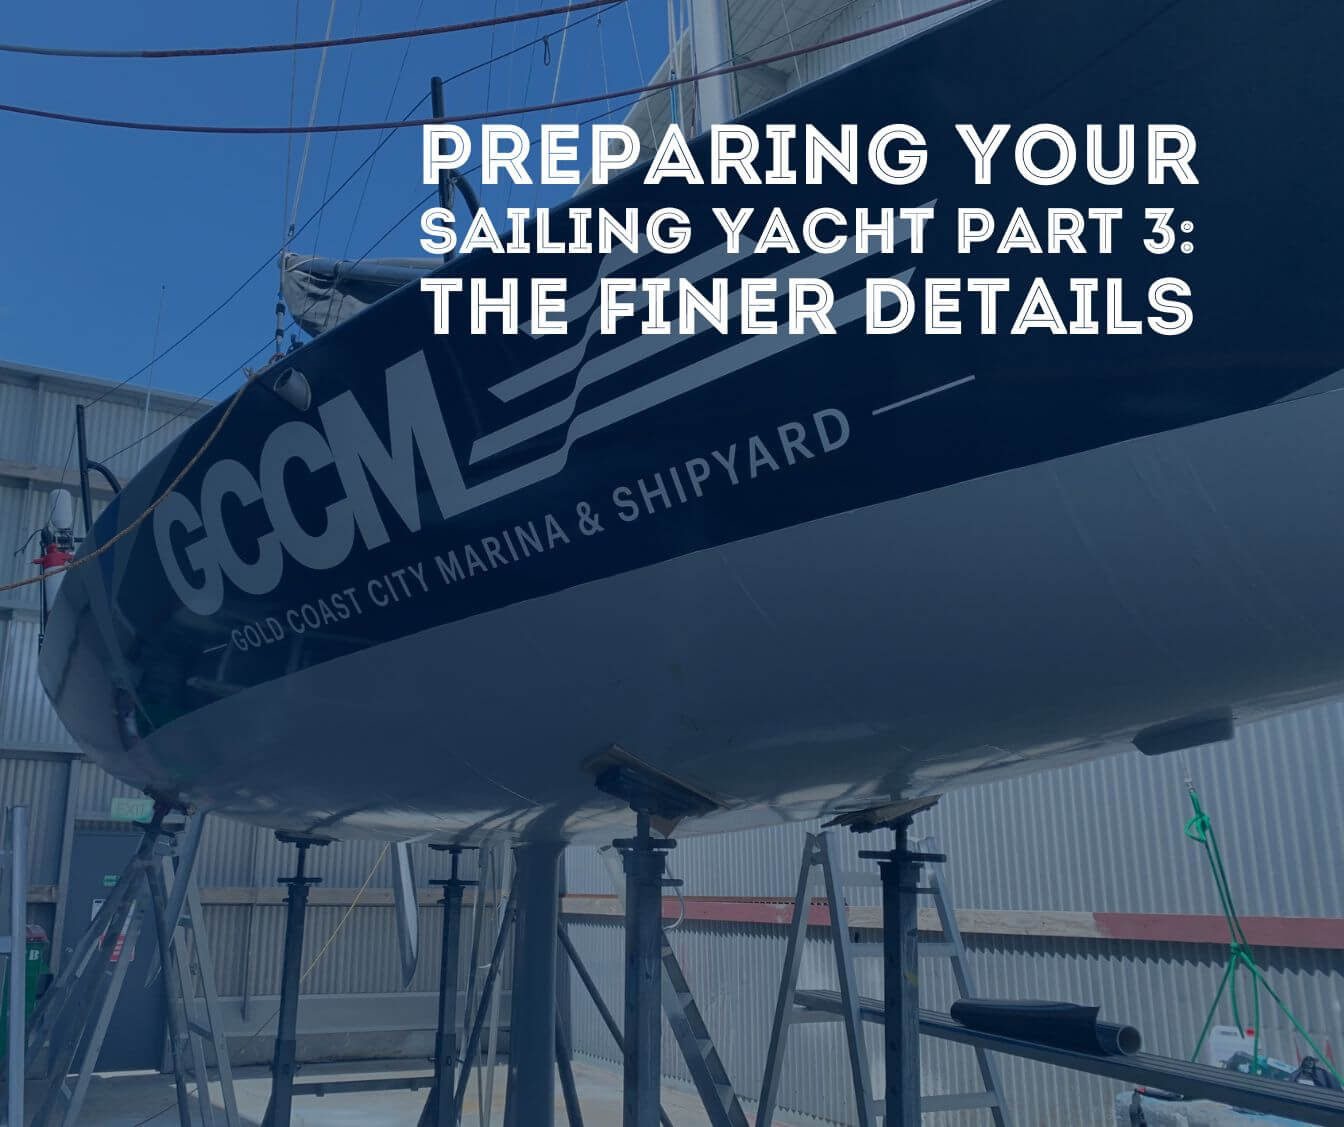 Preparing your Sailing Yacht Part 3: Sailing to Victory: The Finer Details